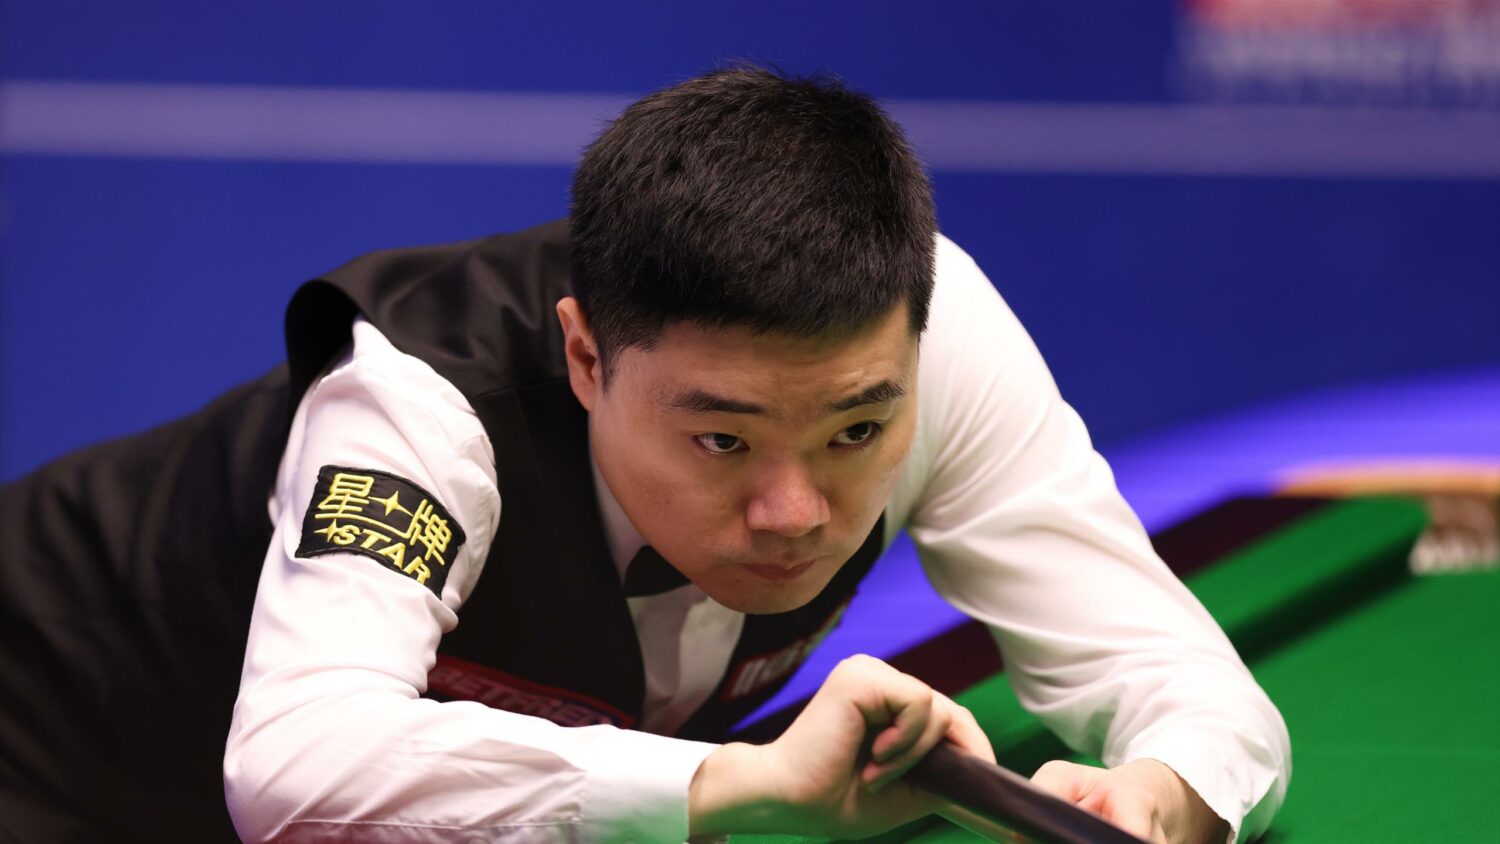 Ding ‘deserves’ to win World Championship